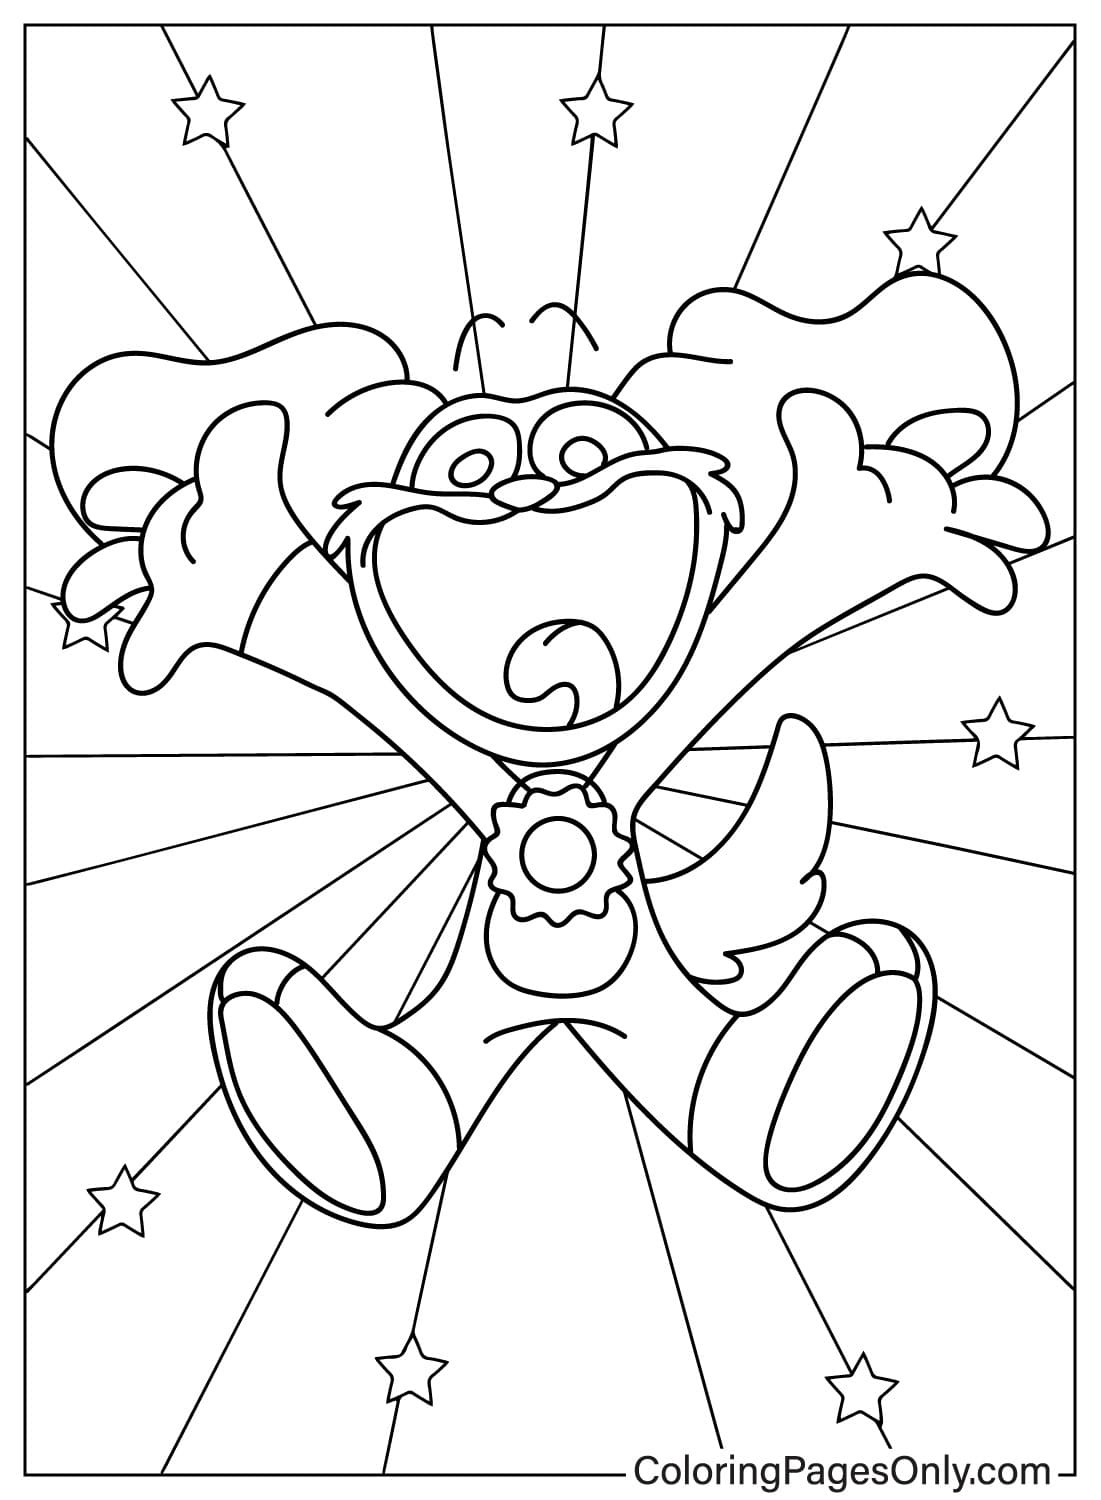 DogDay Coloring Page Free from DogDay